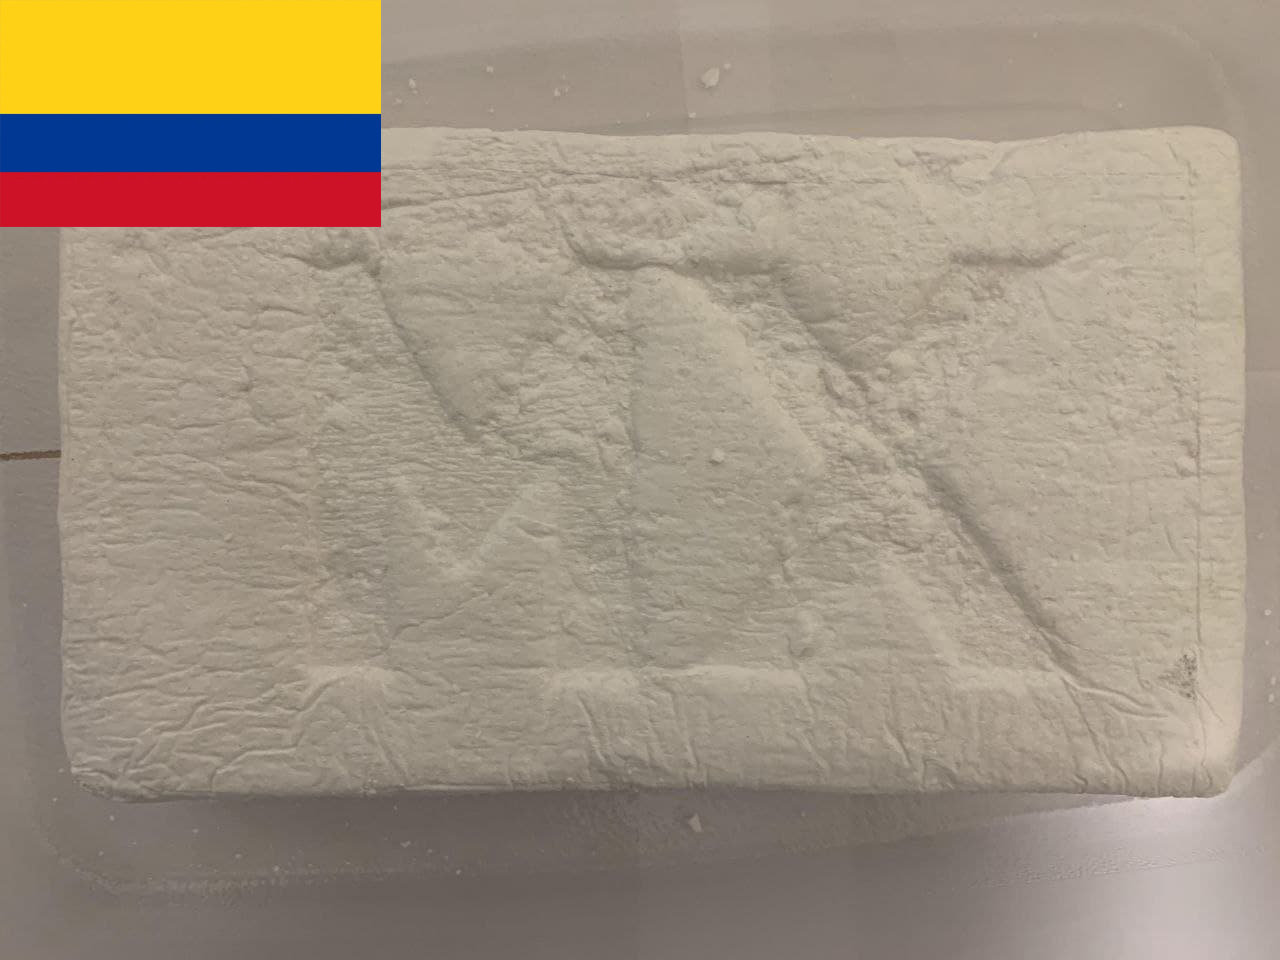 1KG Colombian Cocaine 98% Purity (Local Colombian Delivery) Image